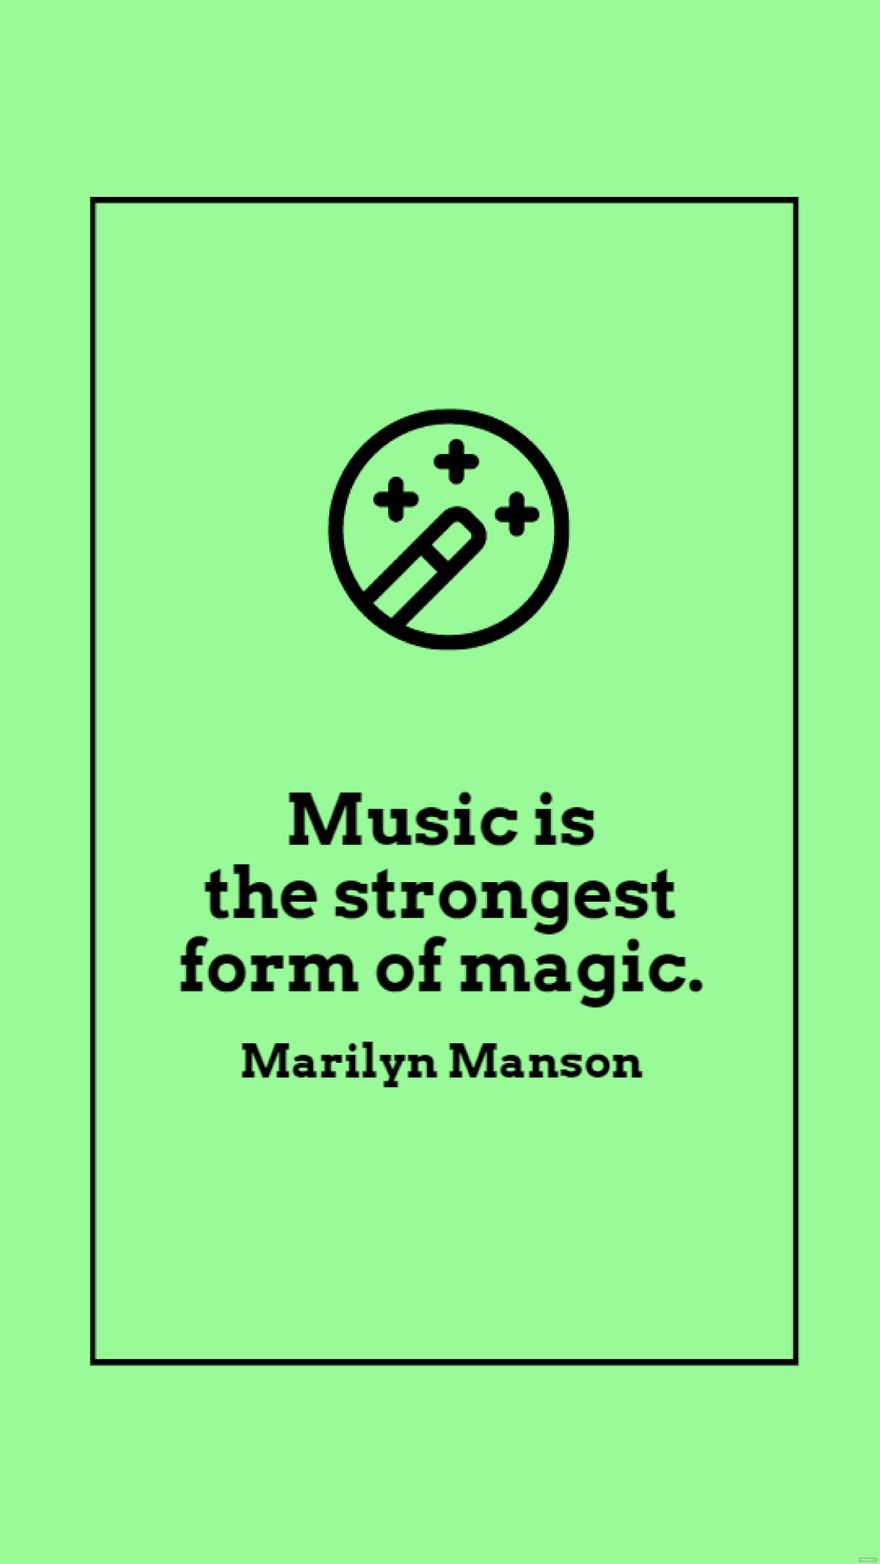 Marilyn Manson - Music is the strongest form of magic.